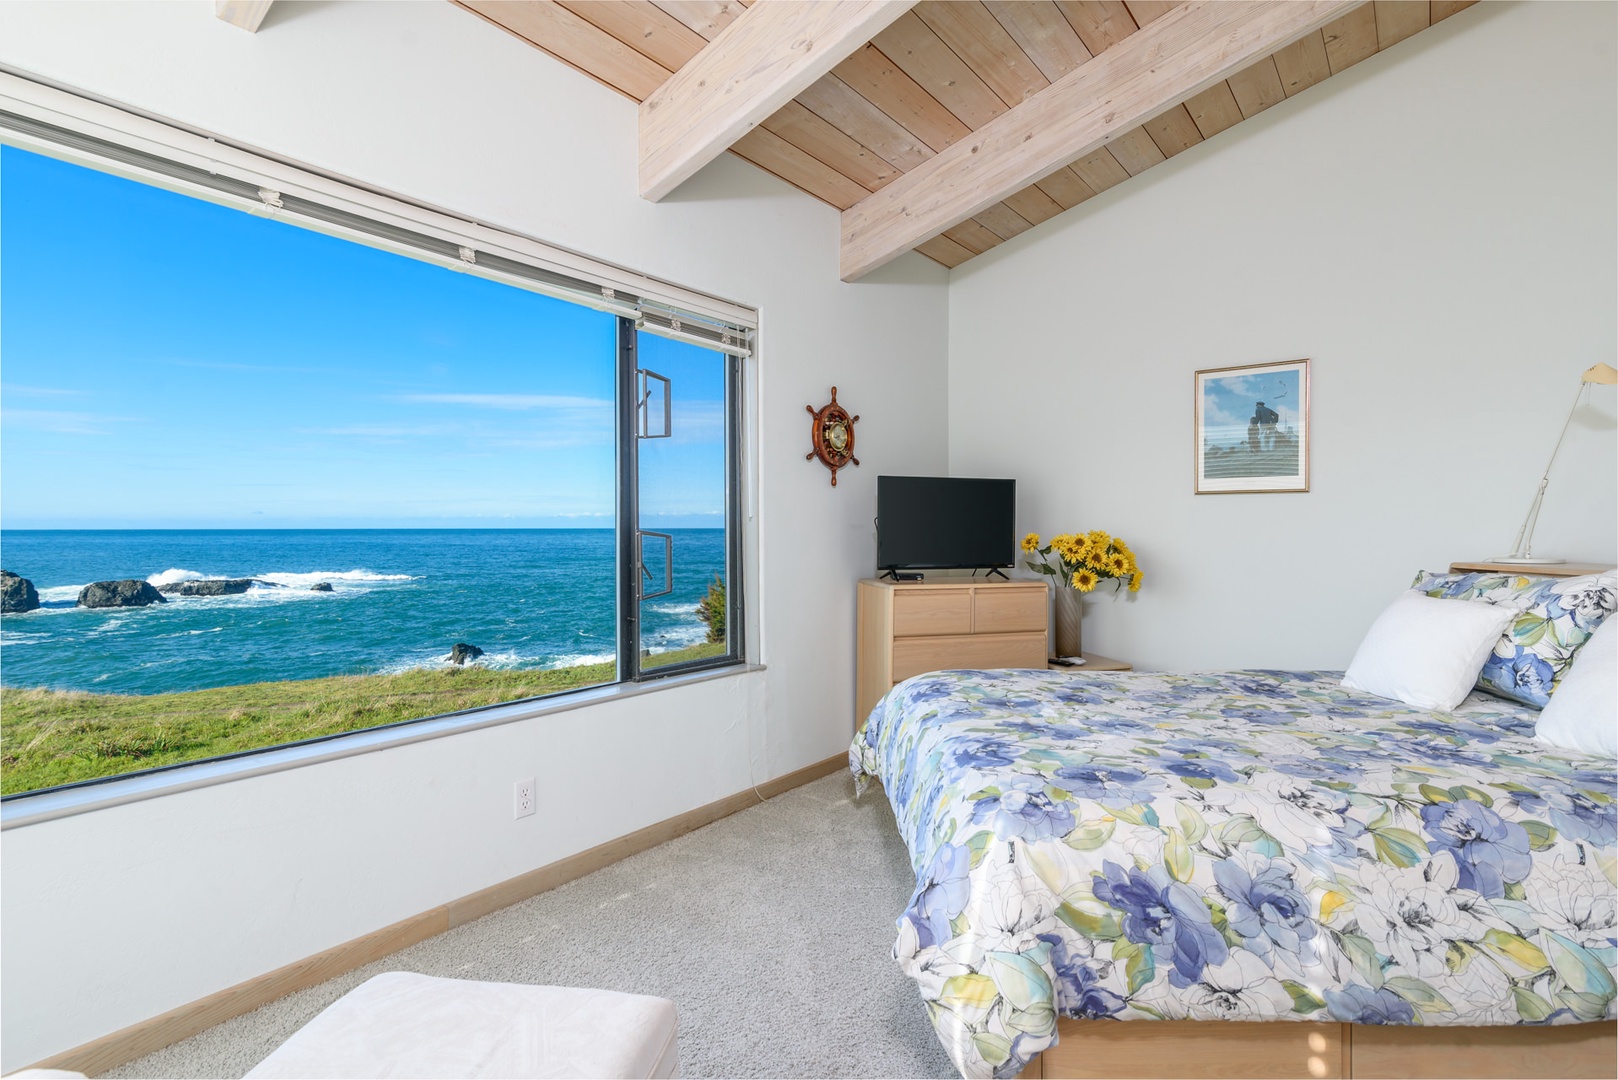 Bedroom #1 after amazing views. with a door  opening to the ocean & bluffs